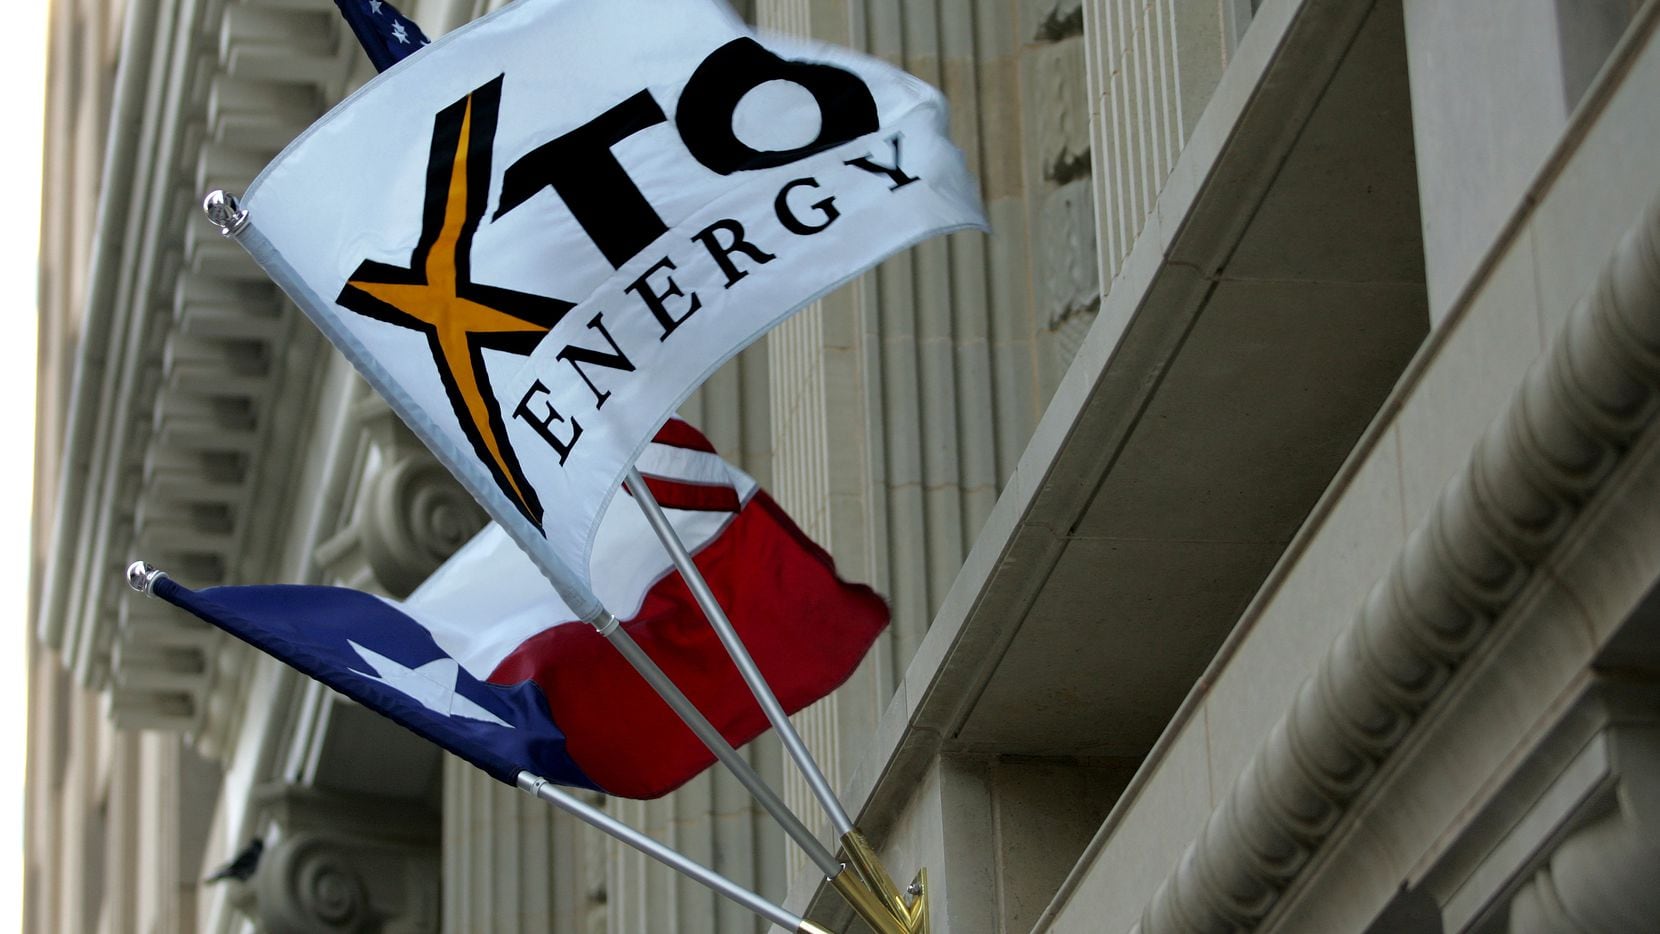 XTO Energy was a corporate fixture in downtown Fort Worth for years. Exxon Mobil bought the...